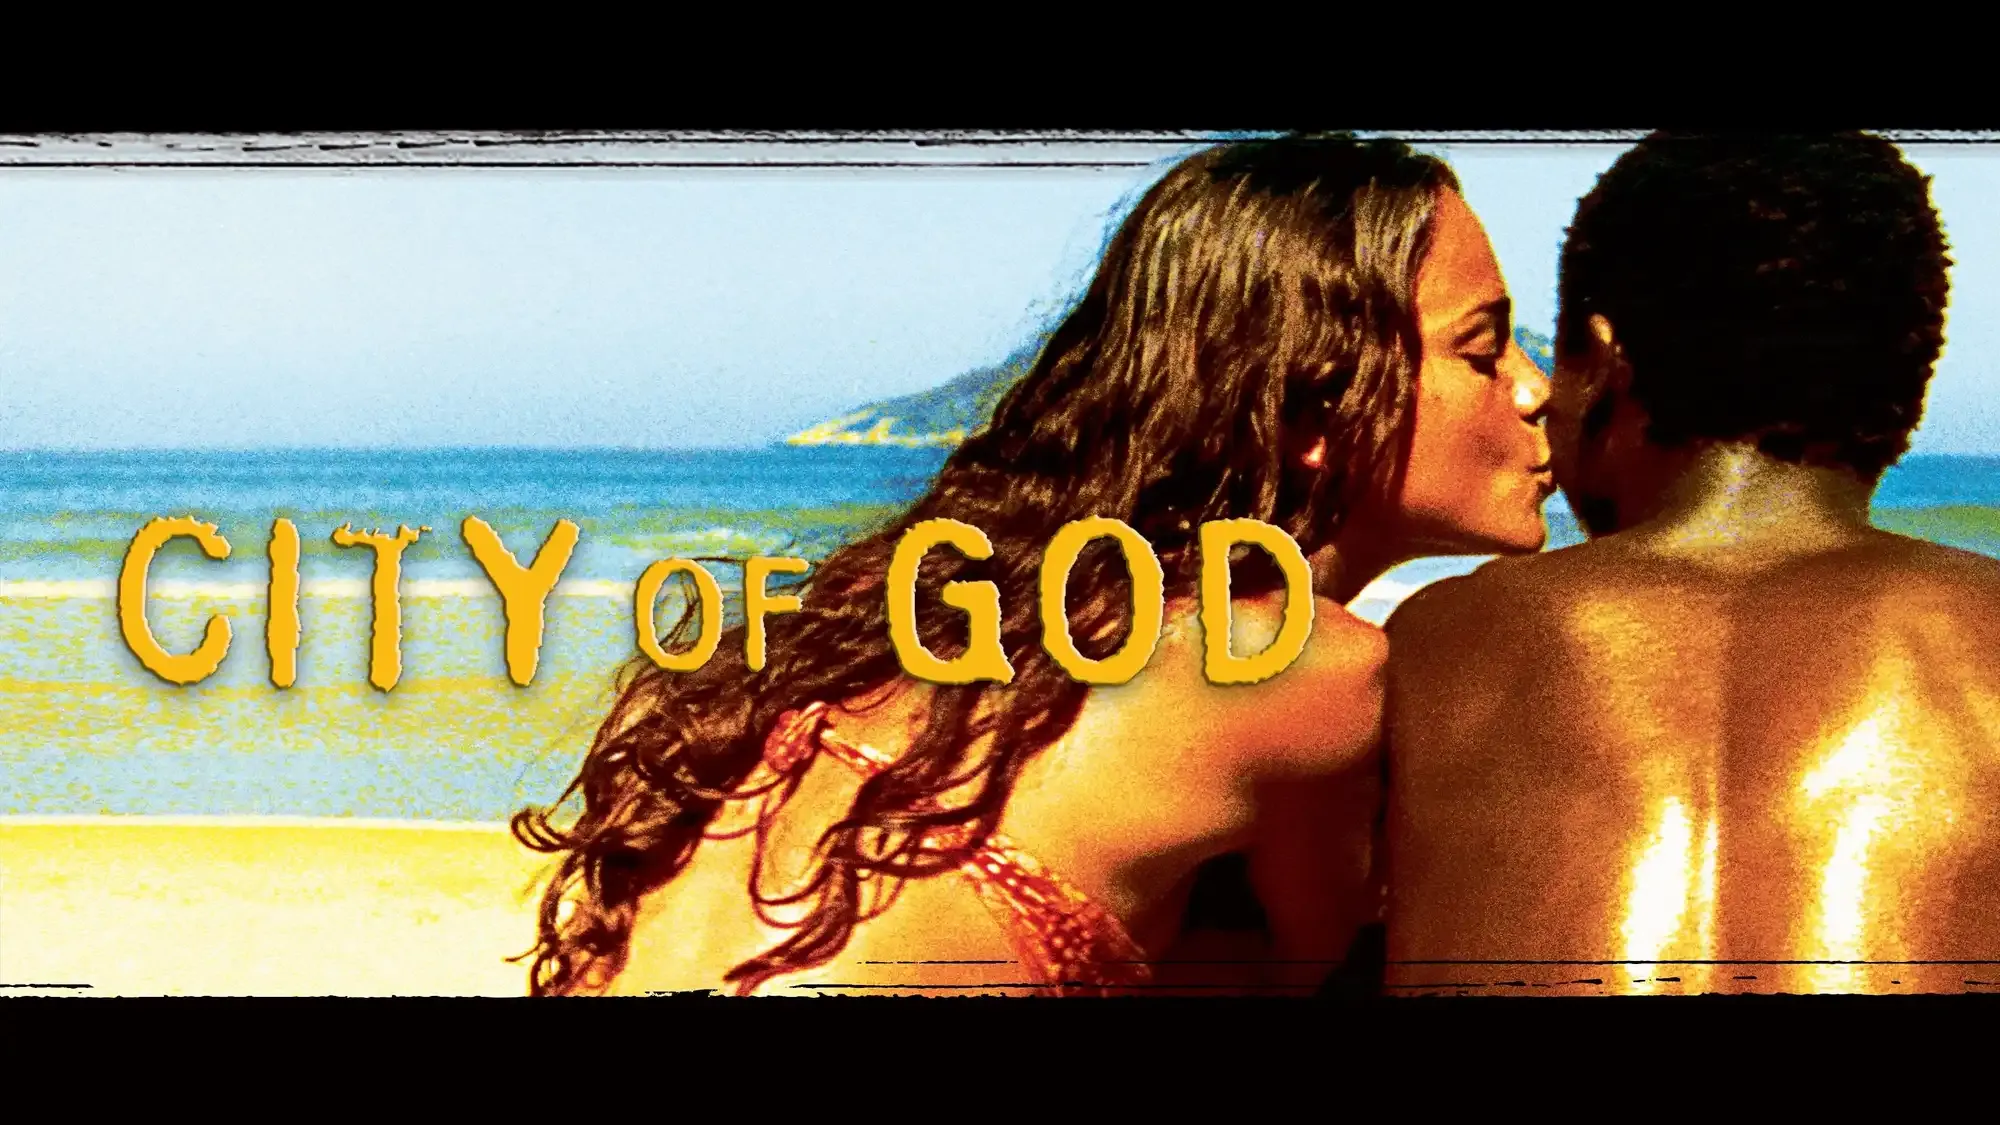 City of God movie review